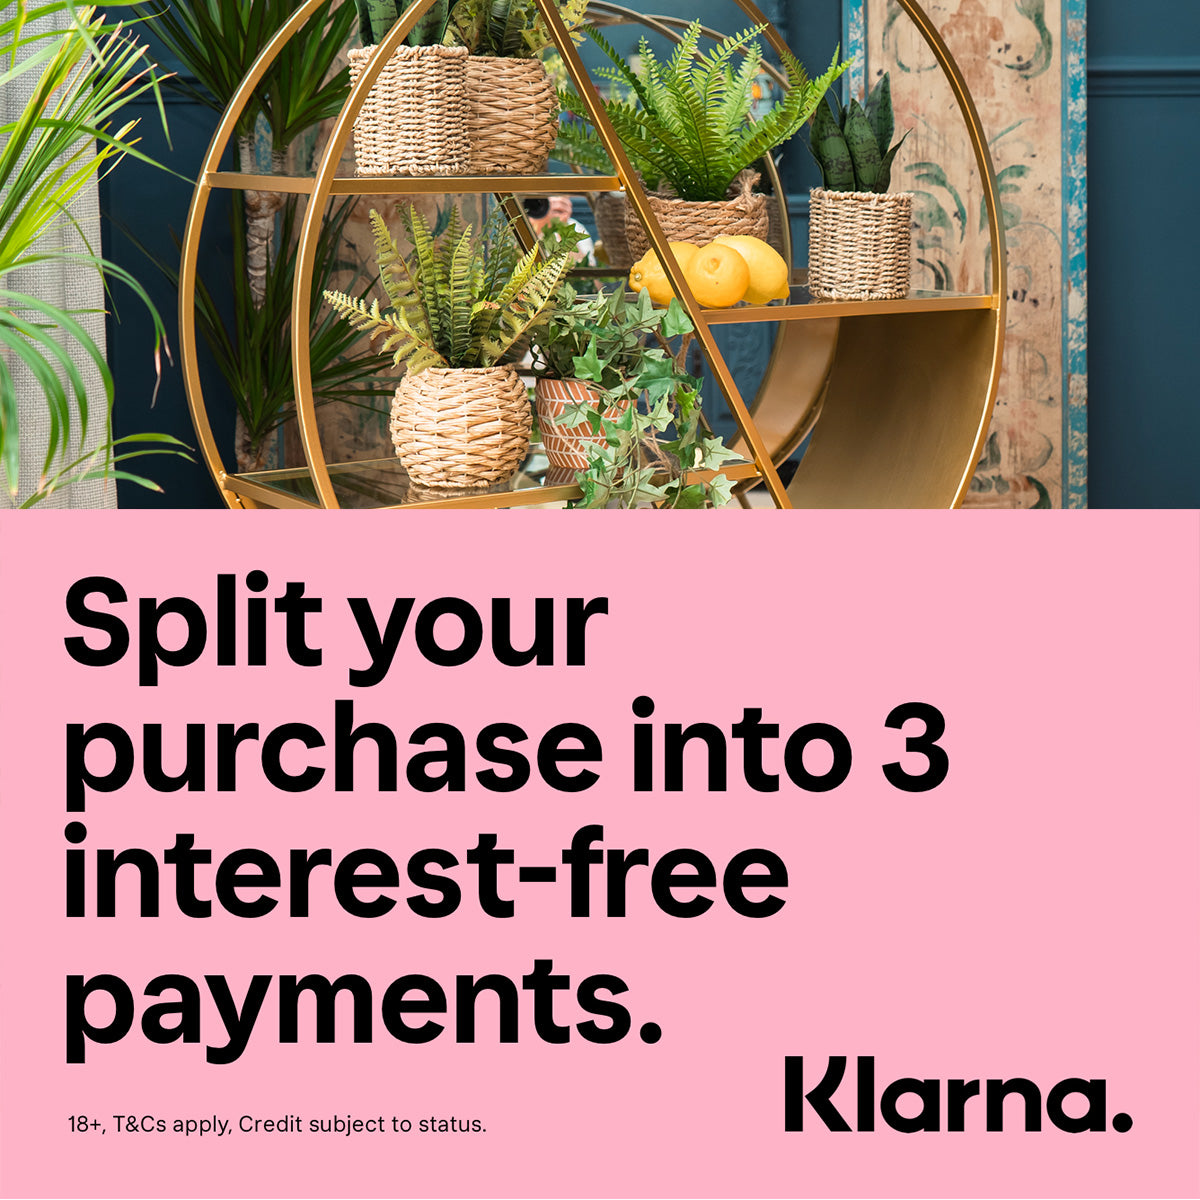 Split your purchase into 3 interest-free payments